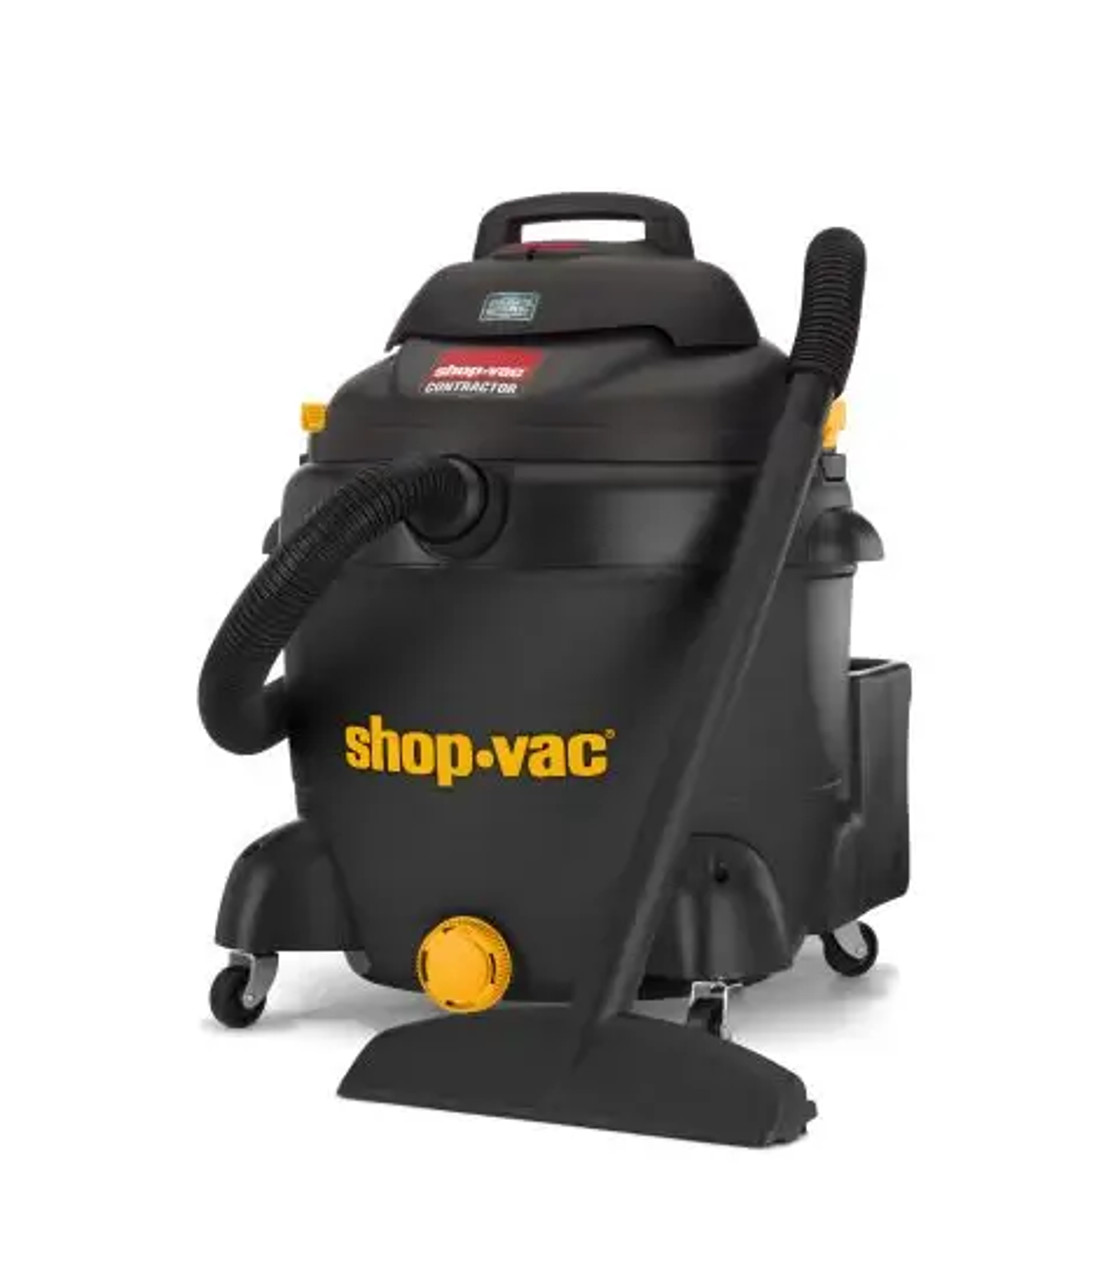 Shop-Vac 18 Gallon 6.5 Peak HP Polyethylene Wet / Dry Vacuum with Tool Kit | Powerful Cleanup Solution